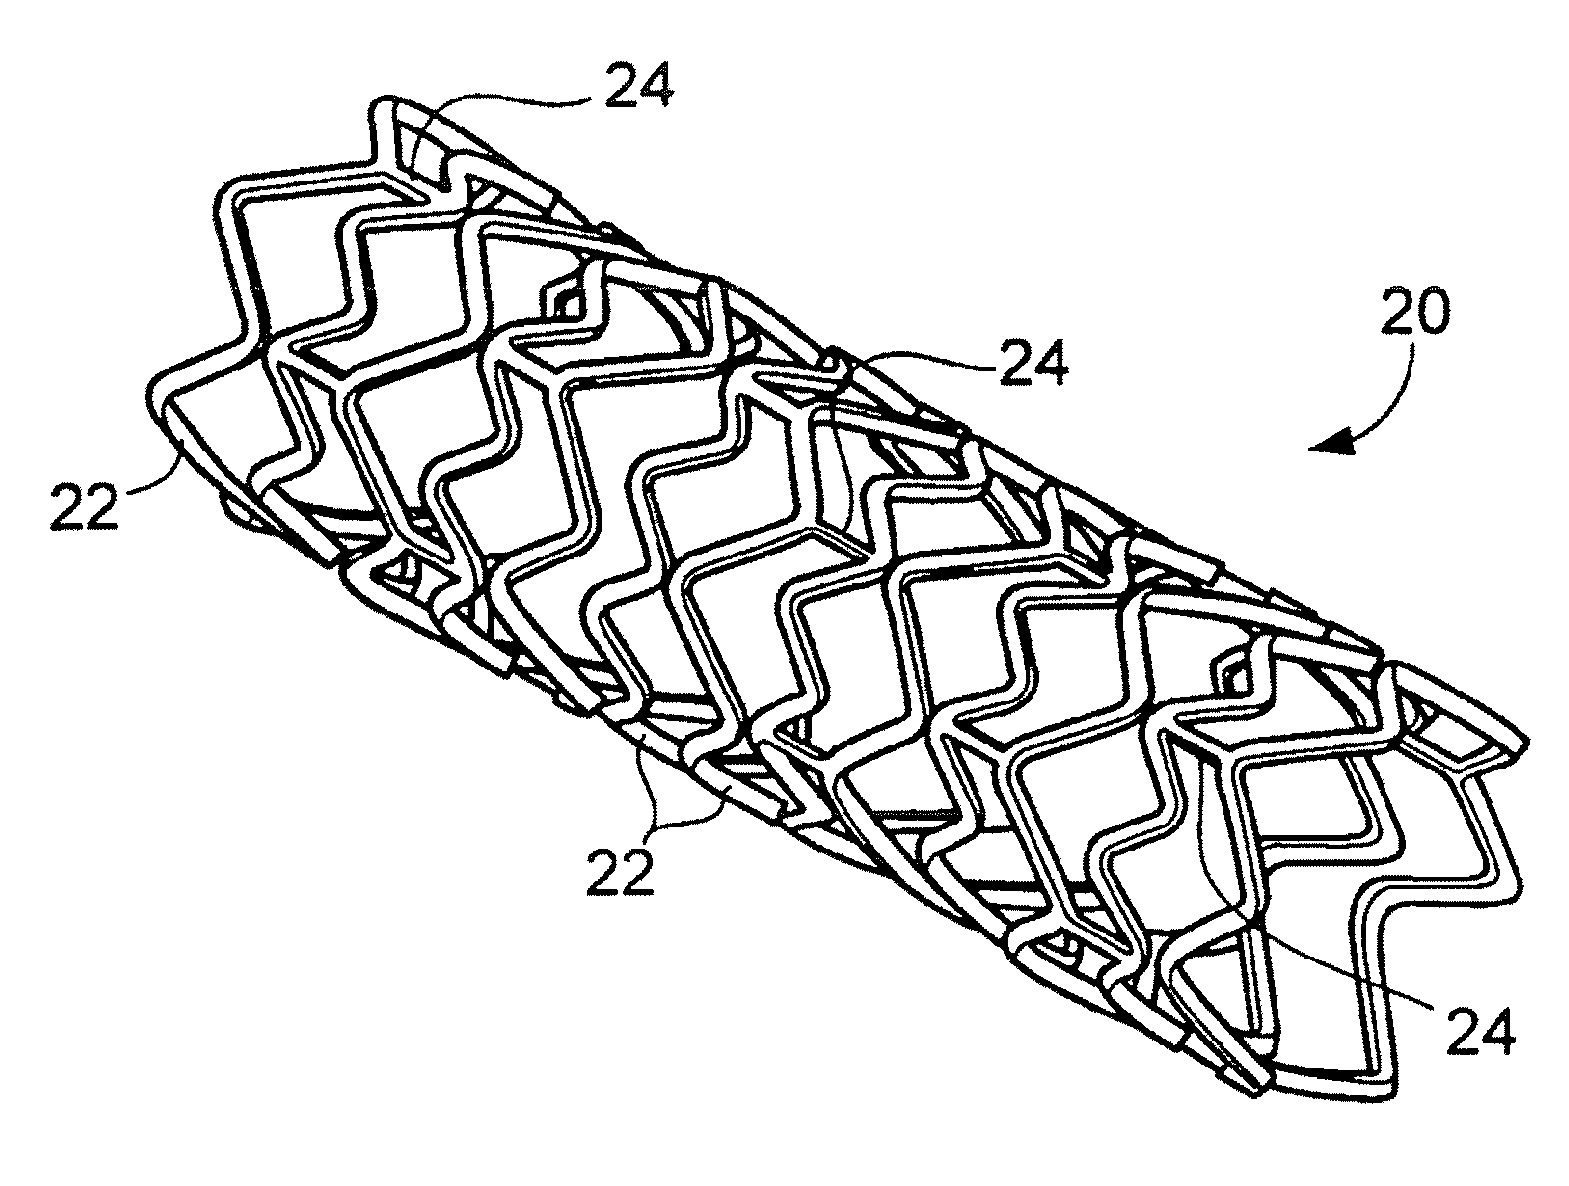 Stents with ceramic drug reservoir layer and methods of making and using the same